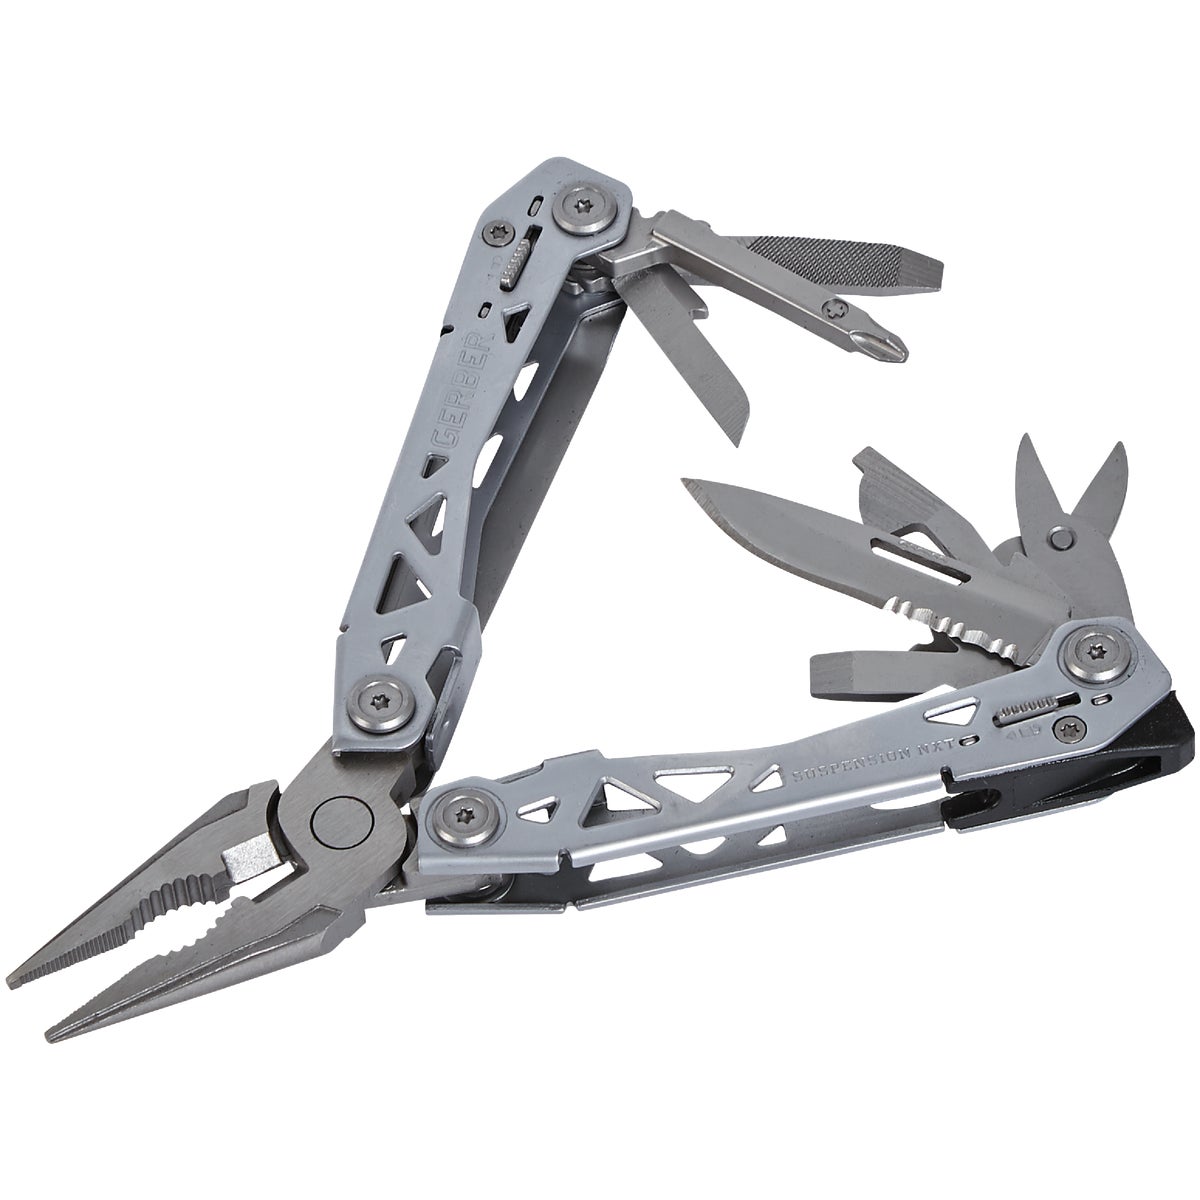 Item 742447, Evolved classic multi-tool. 15 tools in a smart, everyday carry package.